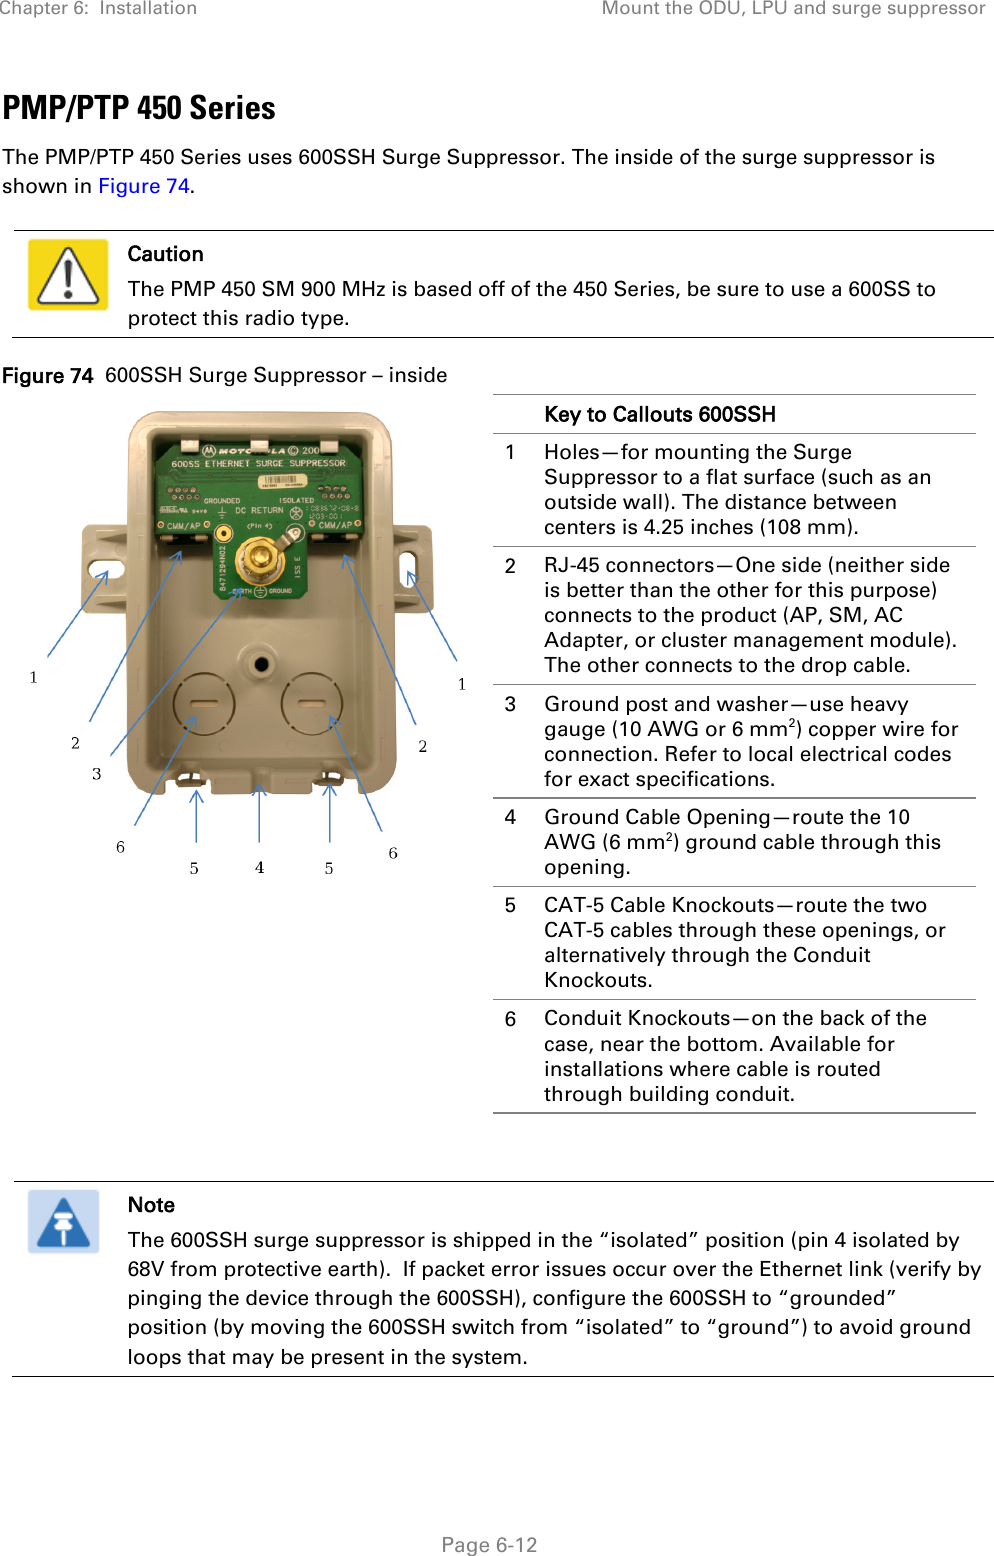 Chapter 6:  Installation Mount the ODU, LPU and surge suppressor   Page 6-12 PMP/PTP 450 Series The PMP/PTP 450 Series uses 600SSH Surge Suppressor. The inside of the surge suppressor is shown in Figure 74.   Caution The PMP 450 SM 900 MHz is based off of the 450 Series, be sure to use a 600SS to protect this radio type. Figure 74  600SSH Surge Suppressor – inside    Key to Callouts 600SSH 1  Holes—for mounting the Surge Suppressor to a flat surface (such as an outside wall). The distance between centers is 4.25 inches (108 mm). 2  RJ-45 connectors—One side (neither side is better than the other for this purpose) connects to the product (AP, SM, AC Adapter, or cluster management module). The other connects to the drop cable. 3  Ground post and washer—use heavy gauge (10 AWG or 6 mm2) copper wire for connection. Refer to local electrical codes for exact specifications. 4  Ground Cable Opening—route the 10 AWG (6 mm2) ground cable through this opening. 5  CAT-5 Cable Knockouts—route the two CAT-5 cables through these openings, or alternatively through the Conduit Knockouts. 6  Conduit Knockouts—on the back of the case, near the bottom. Available for installations where cable is routed through building conduit.    Note The 600SSH surge suppressor is shipped in the “isolated” position (pin 4 isolated by 68V from protective earth).  If packet error issues occur over the Ethernet link (verify by pinging the device through the 600SSH), configure the 600SSH to “grounded” position (by moving the 600SSH switch from “isolated” to “ground”) to avoid ground loops that may be present in the system.  